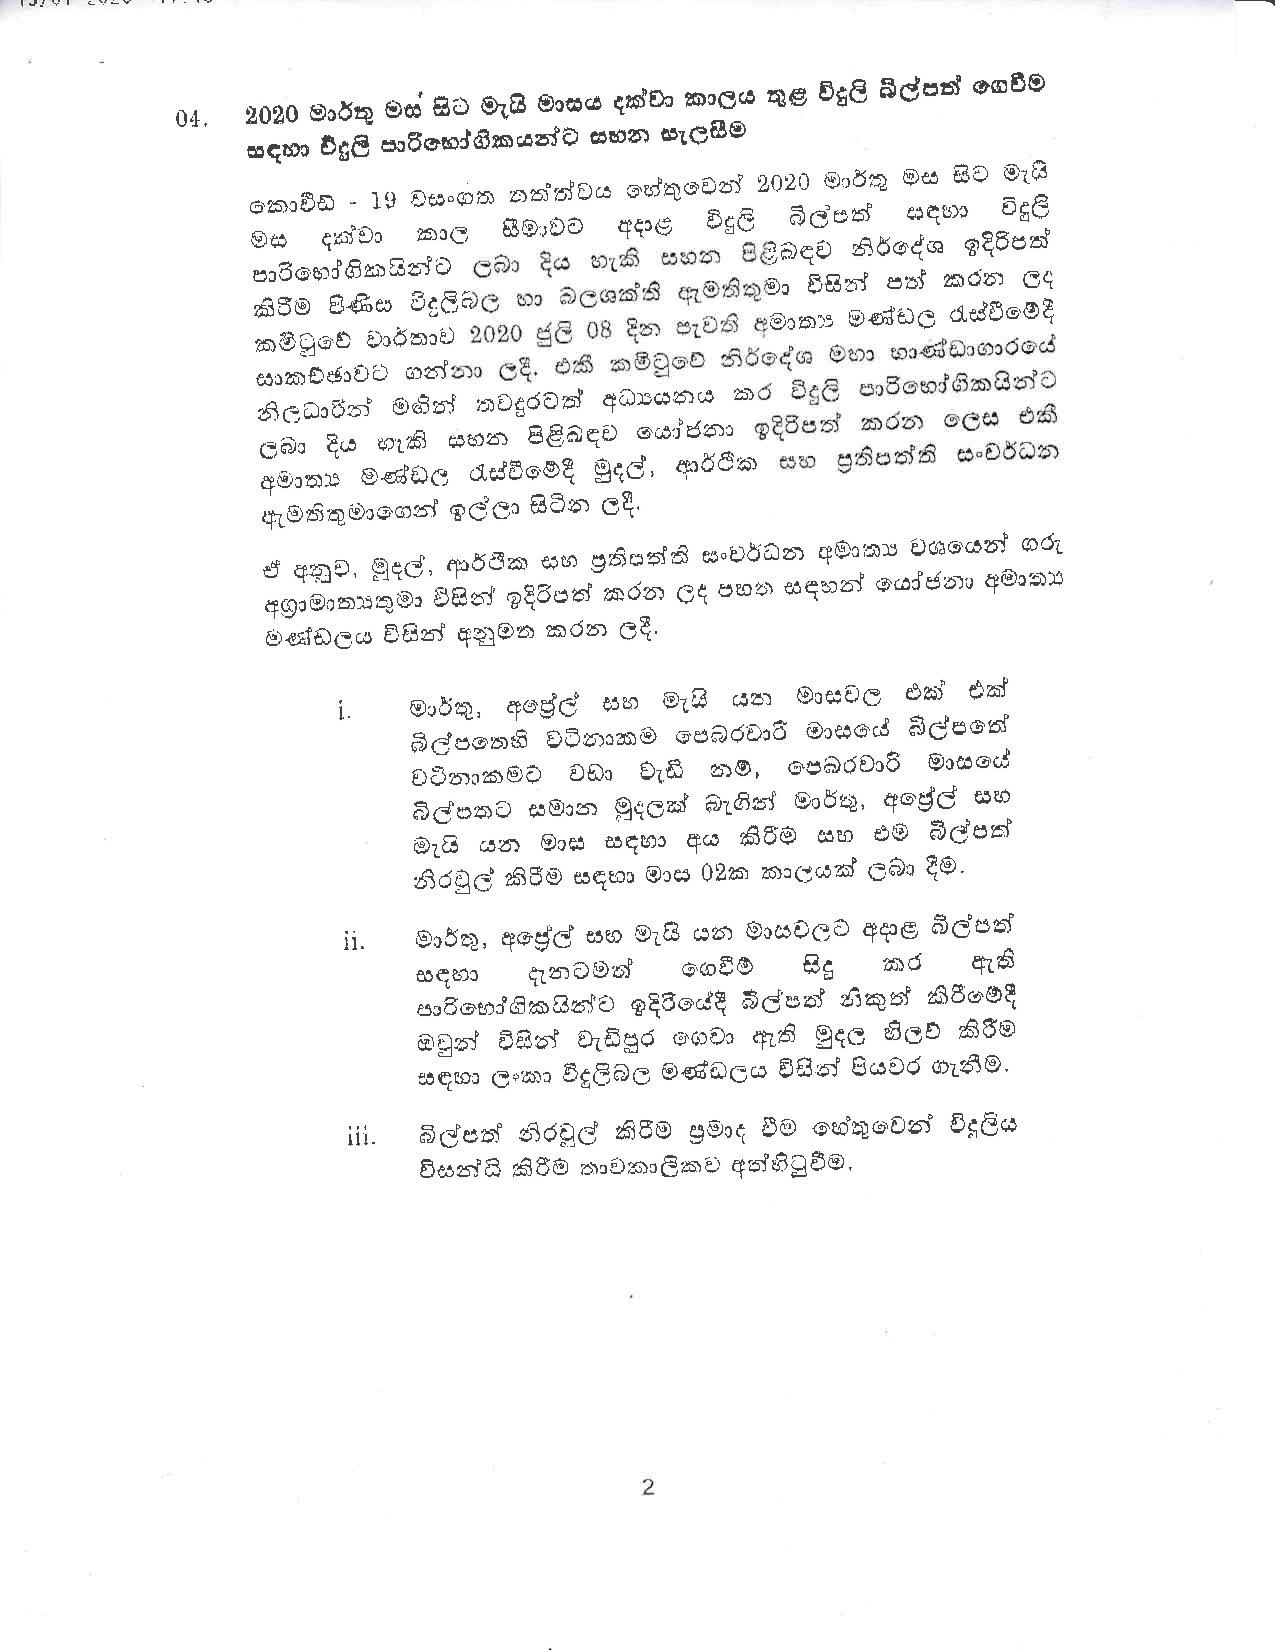 Cabinet Decision on 15.07.2020 page 002